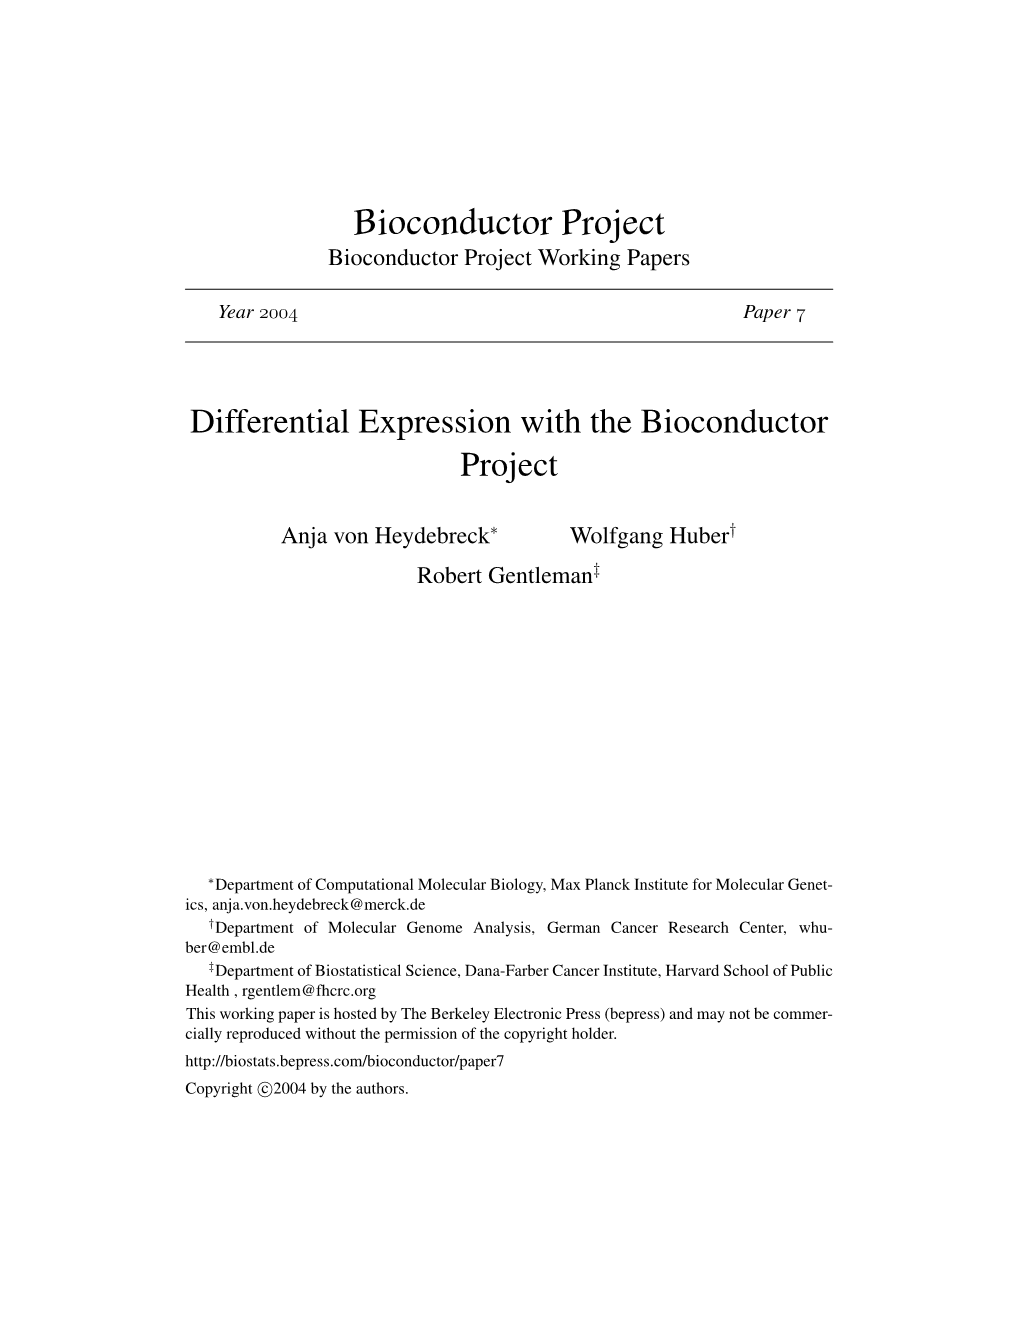 Differential Expression with the Bioconductor Project